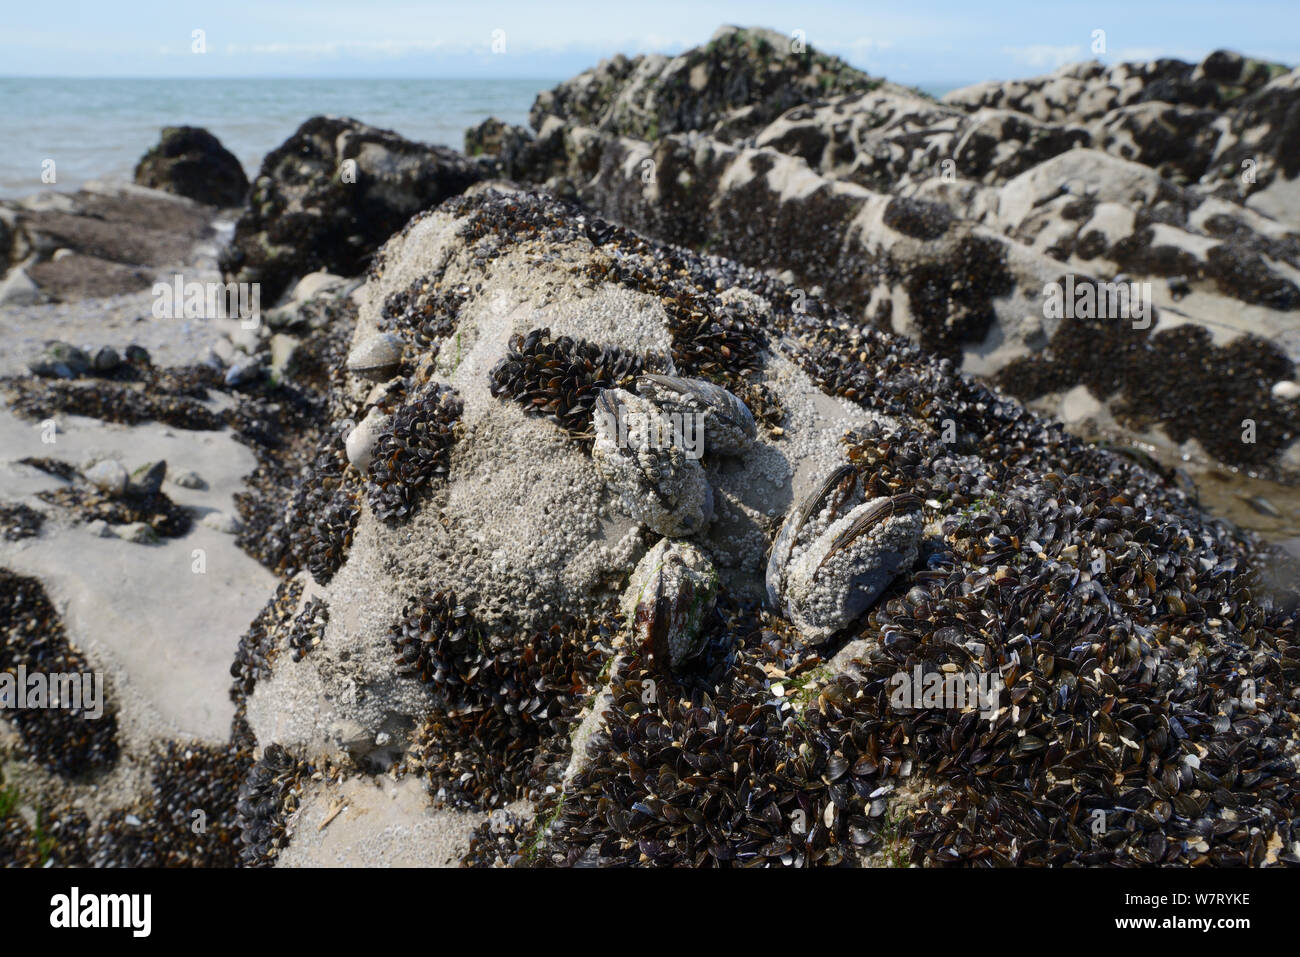 Recenty settled young Common mussels (Mytilus edulis) alongside barnacle encrusted adults on rocks exposed on a rocky shore at low tide, Rhossili, The Gower Peninsula, UK, June. Stock Photo